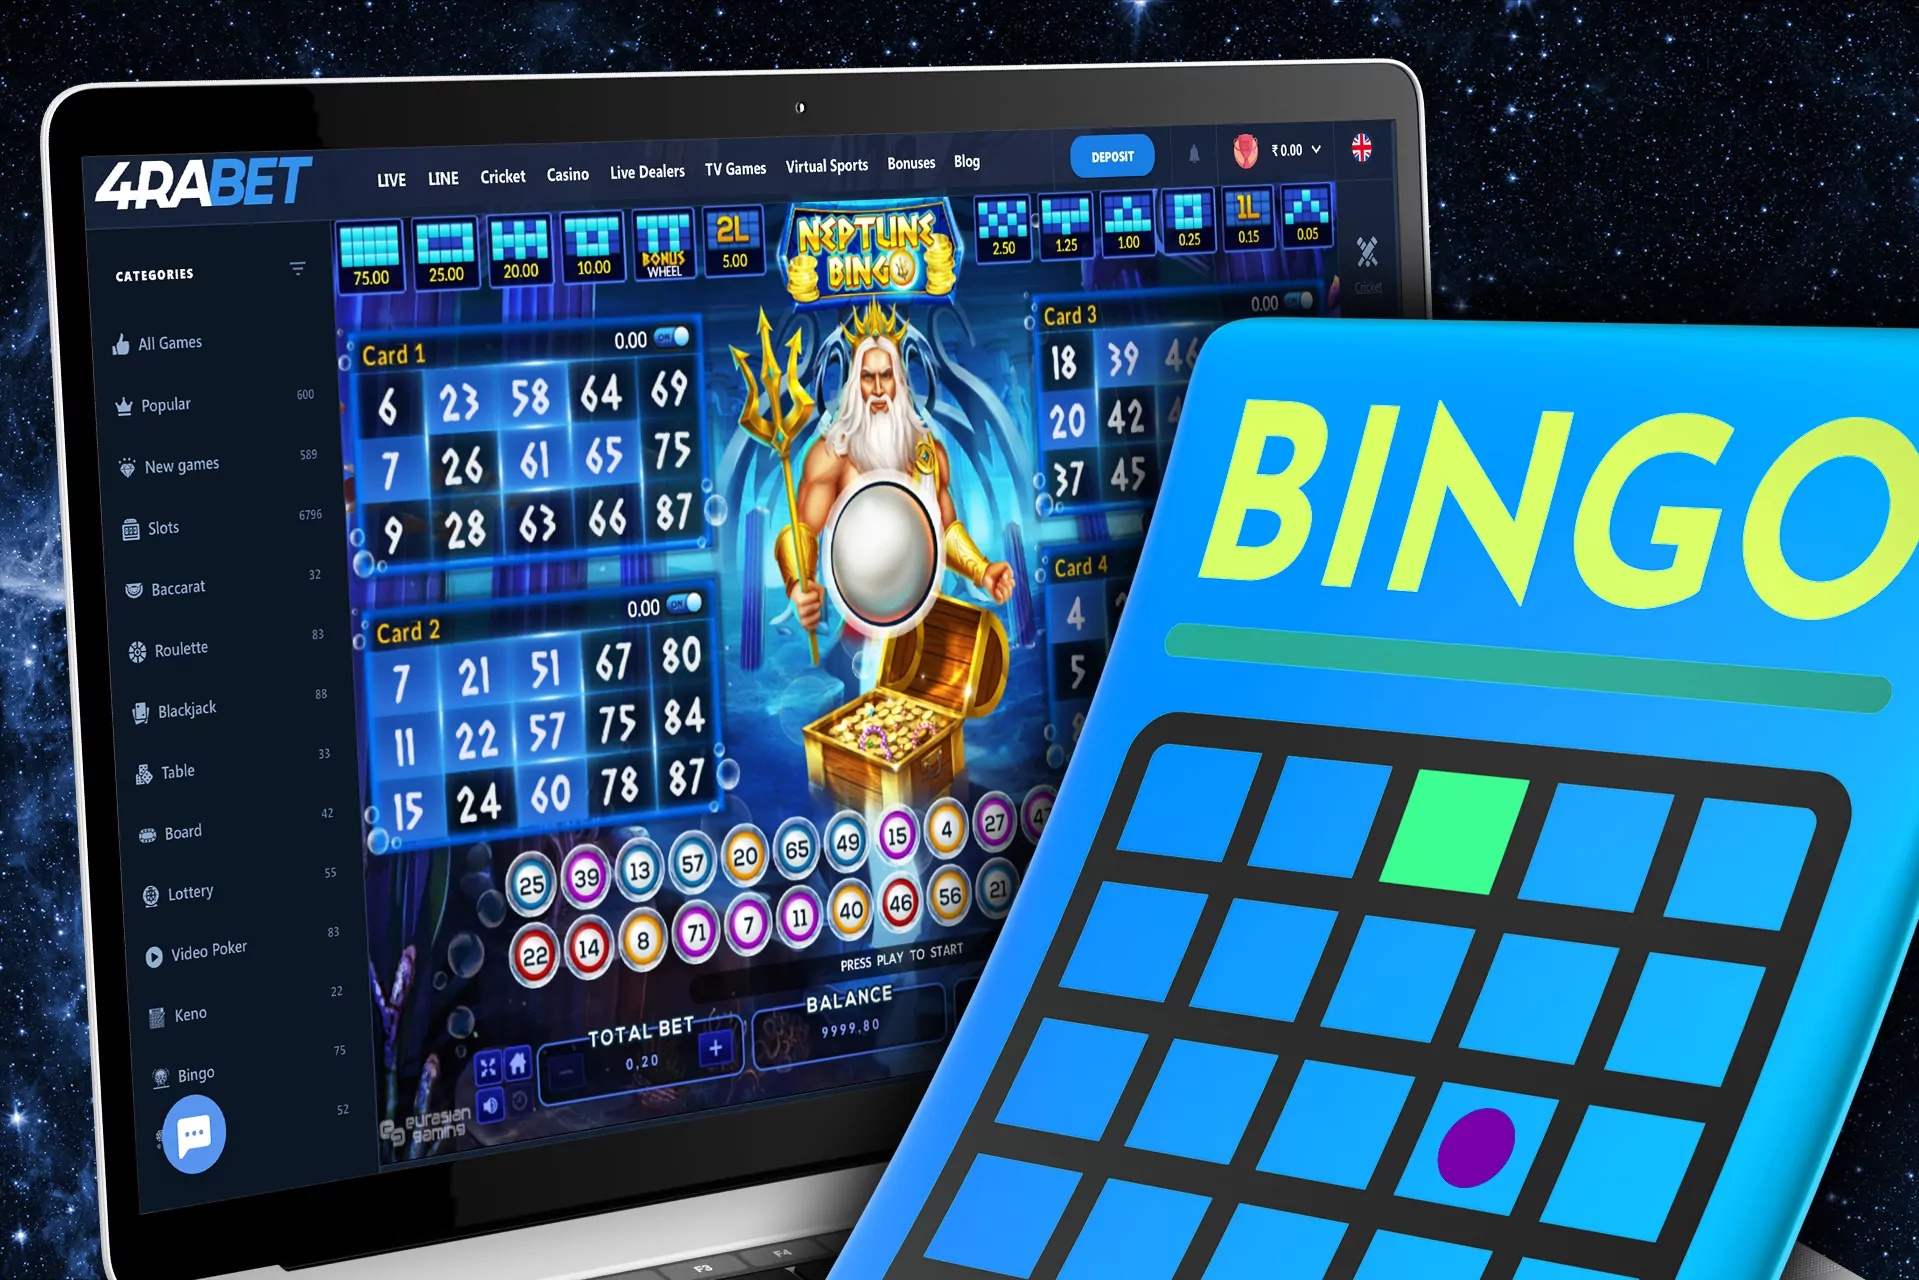 Bingo is also among the games of the 4rabet casino.